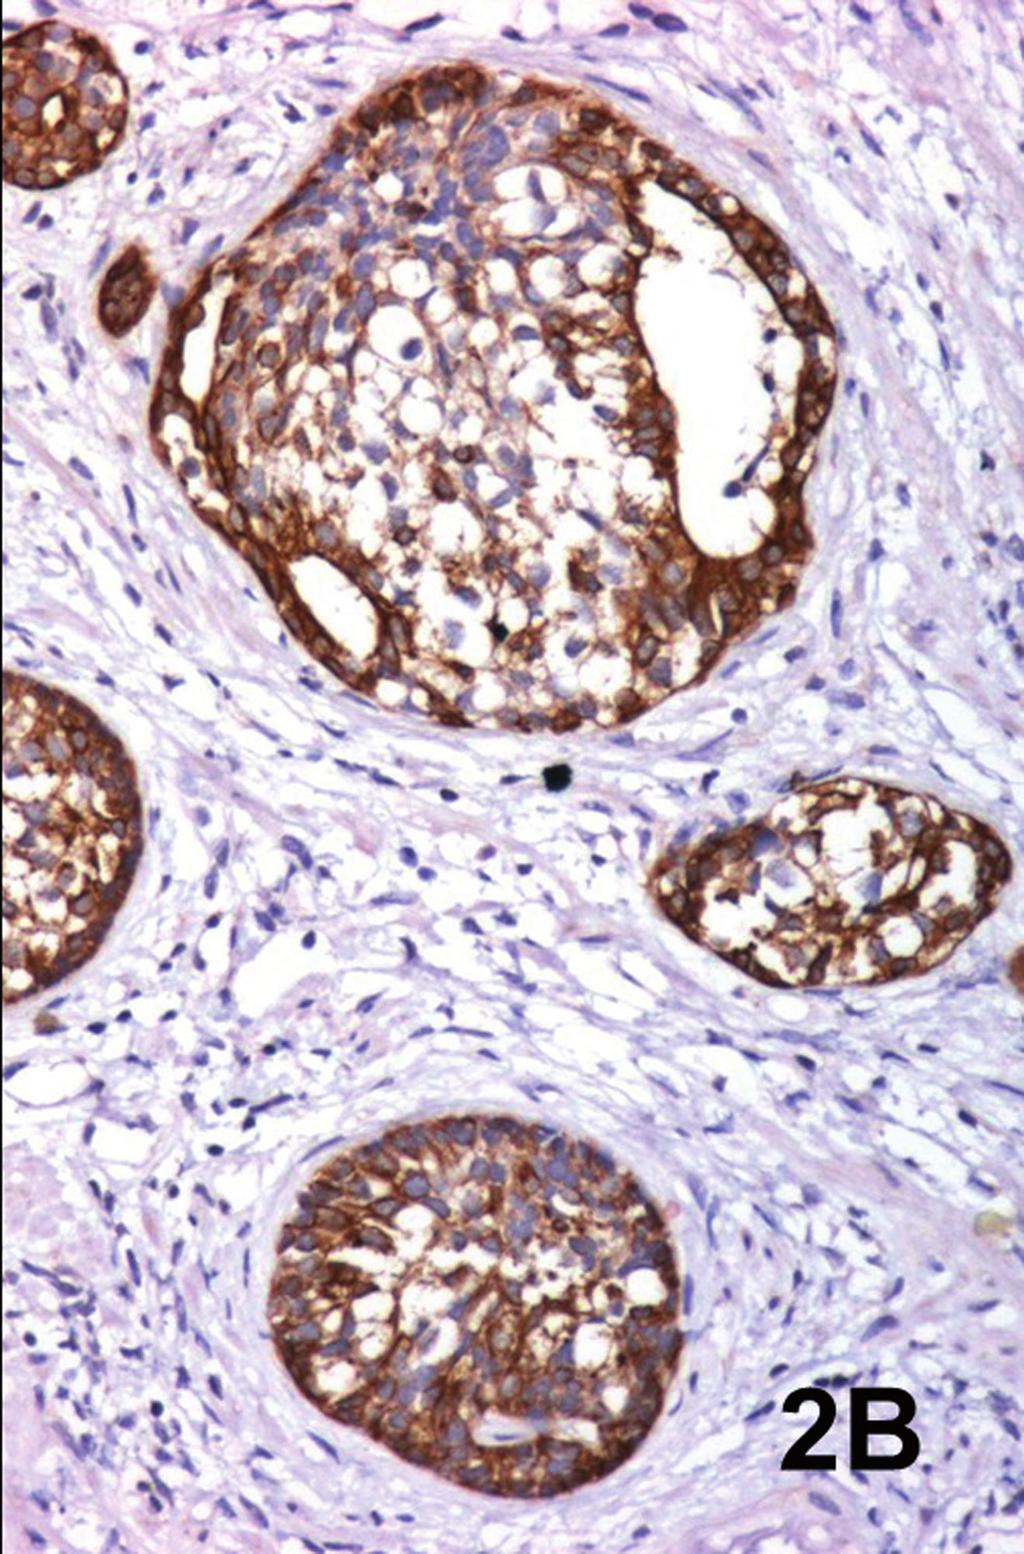 Note the nests of basophilic and clear cells with an irregular distribution. The stroma shows sclerosis and chronic inflammation. (Hematoxylin & Eosin. Original magnification x 95).